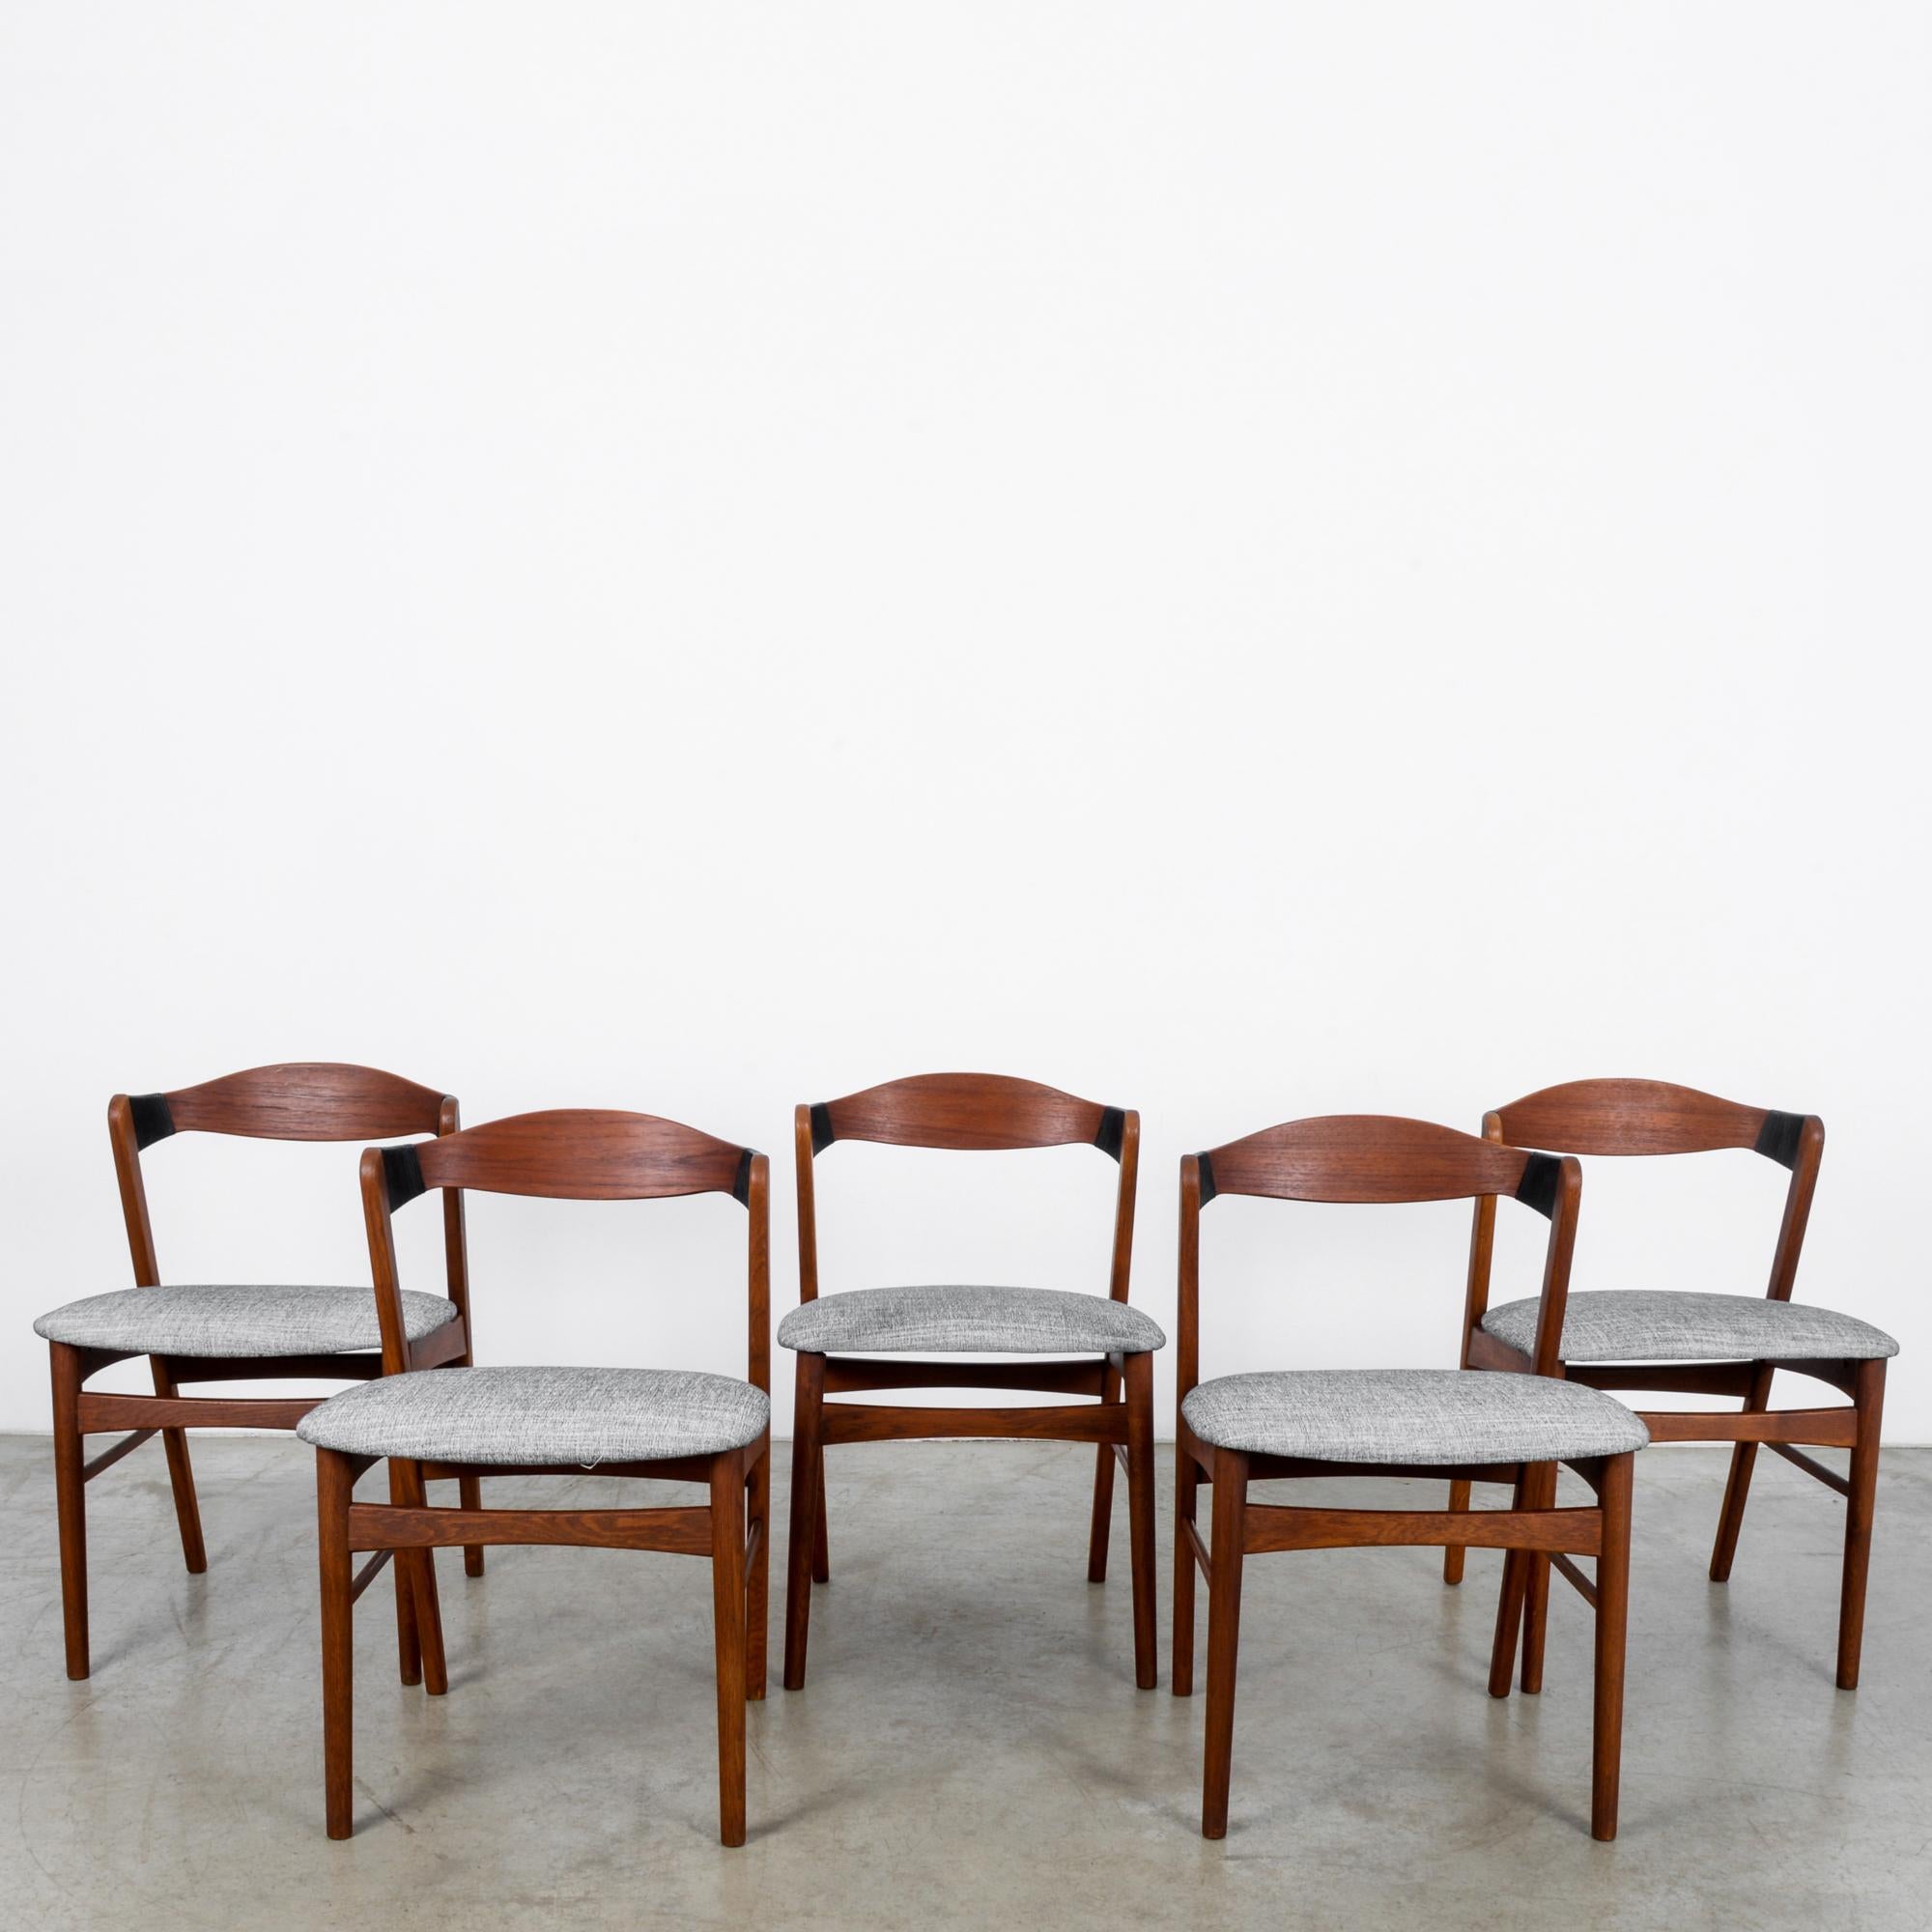 1960s Danish Teak Chairs with Upholstered Seats, Set of Five 5